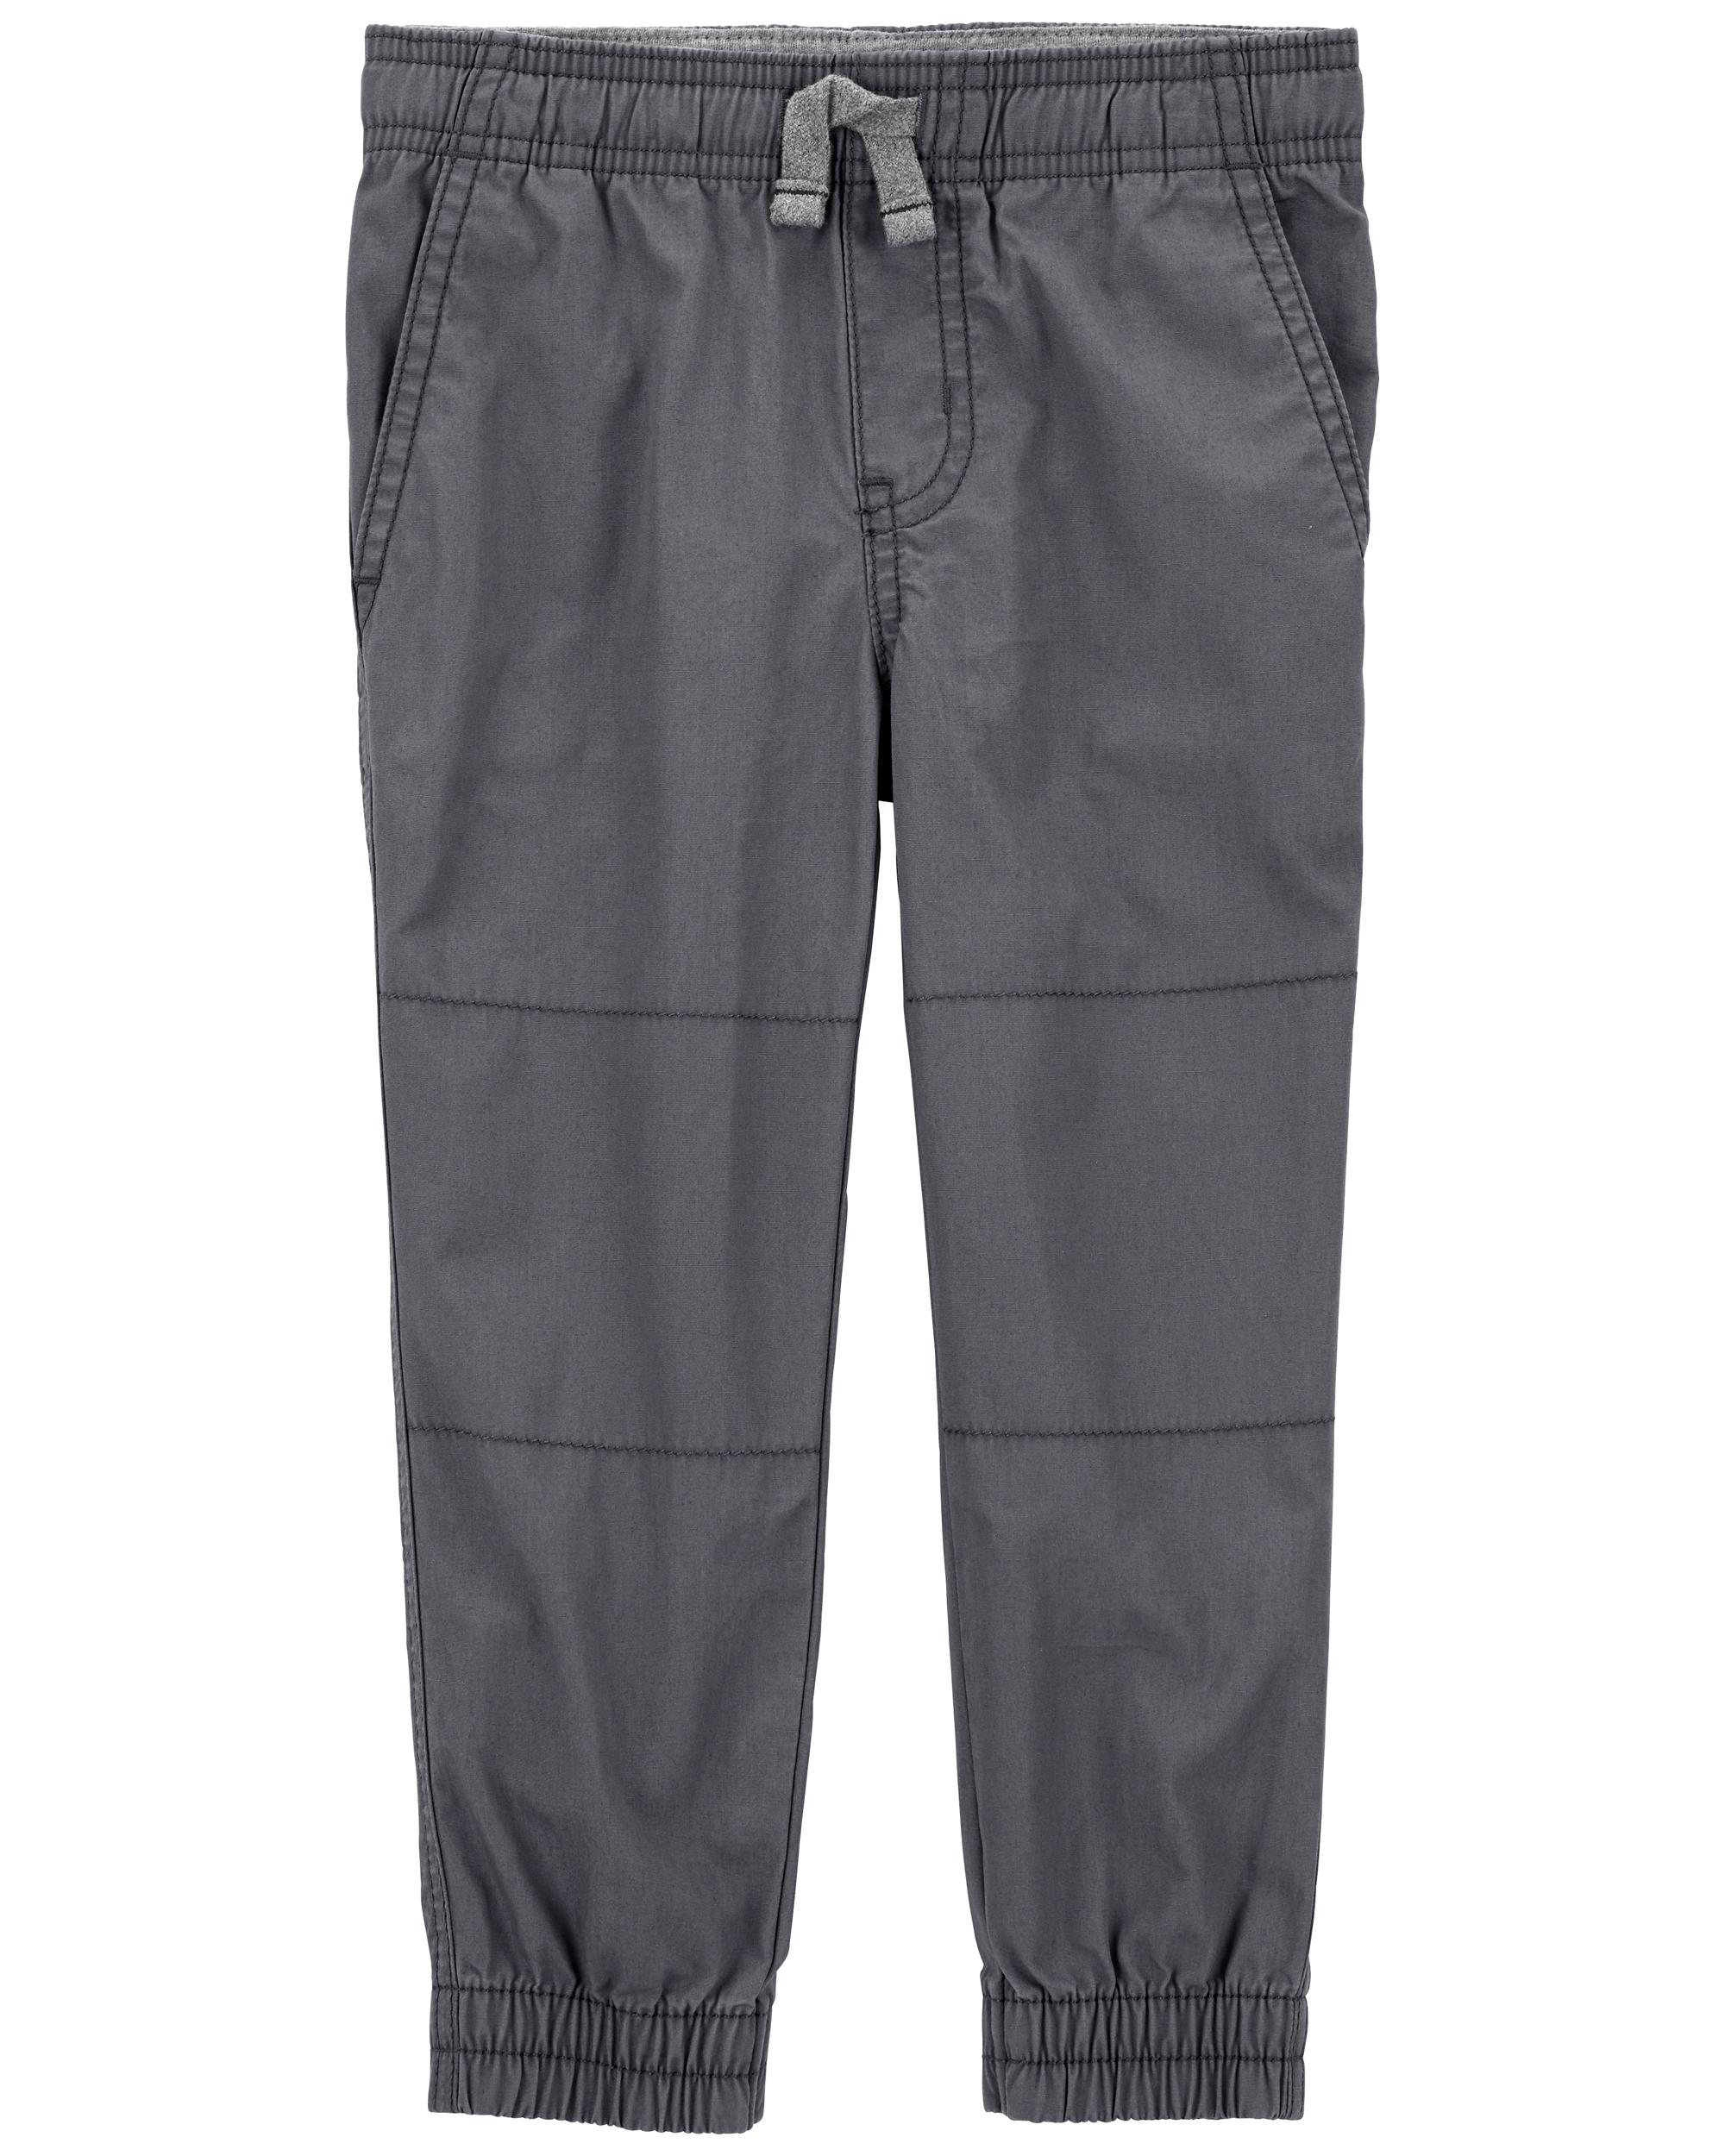 Everyday Pull-On Pants